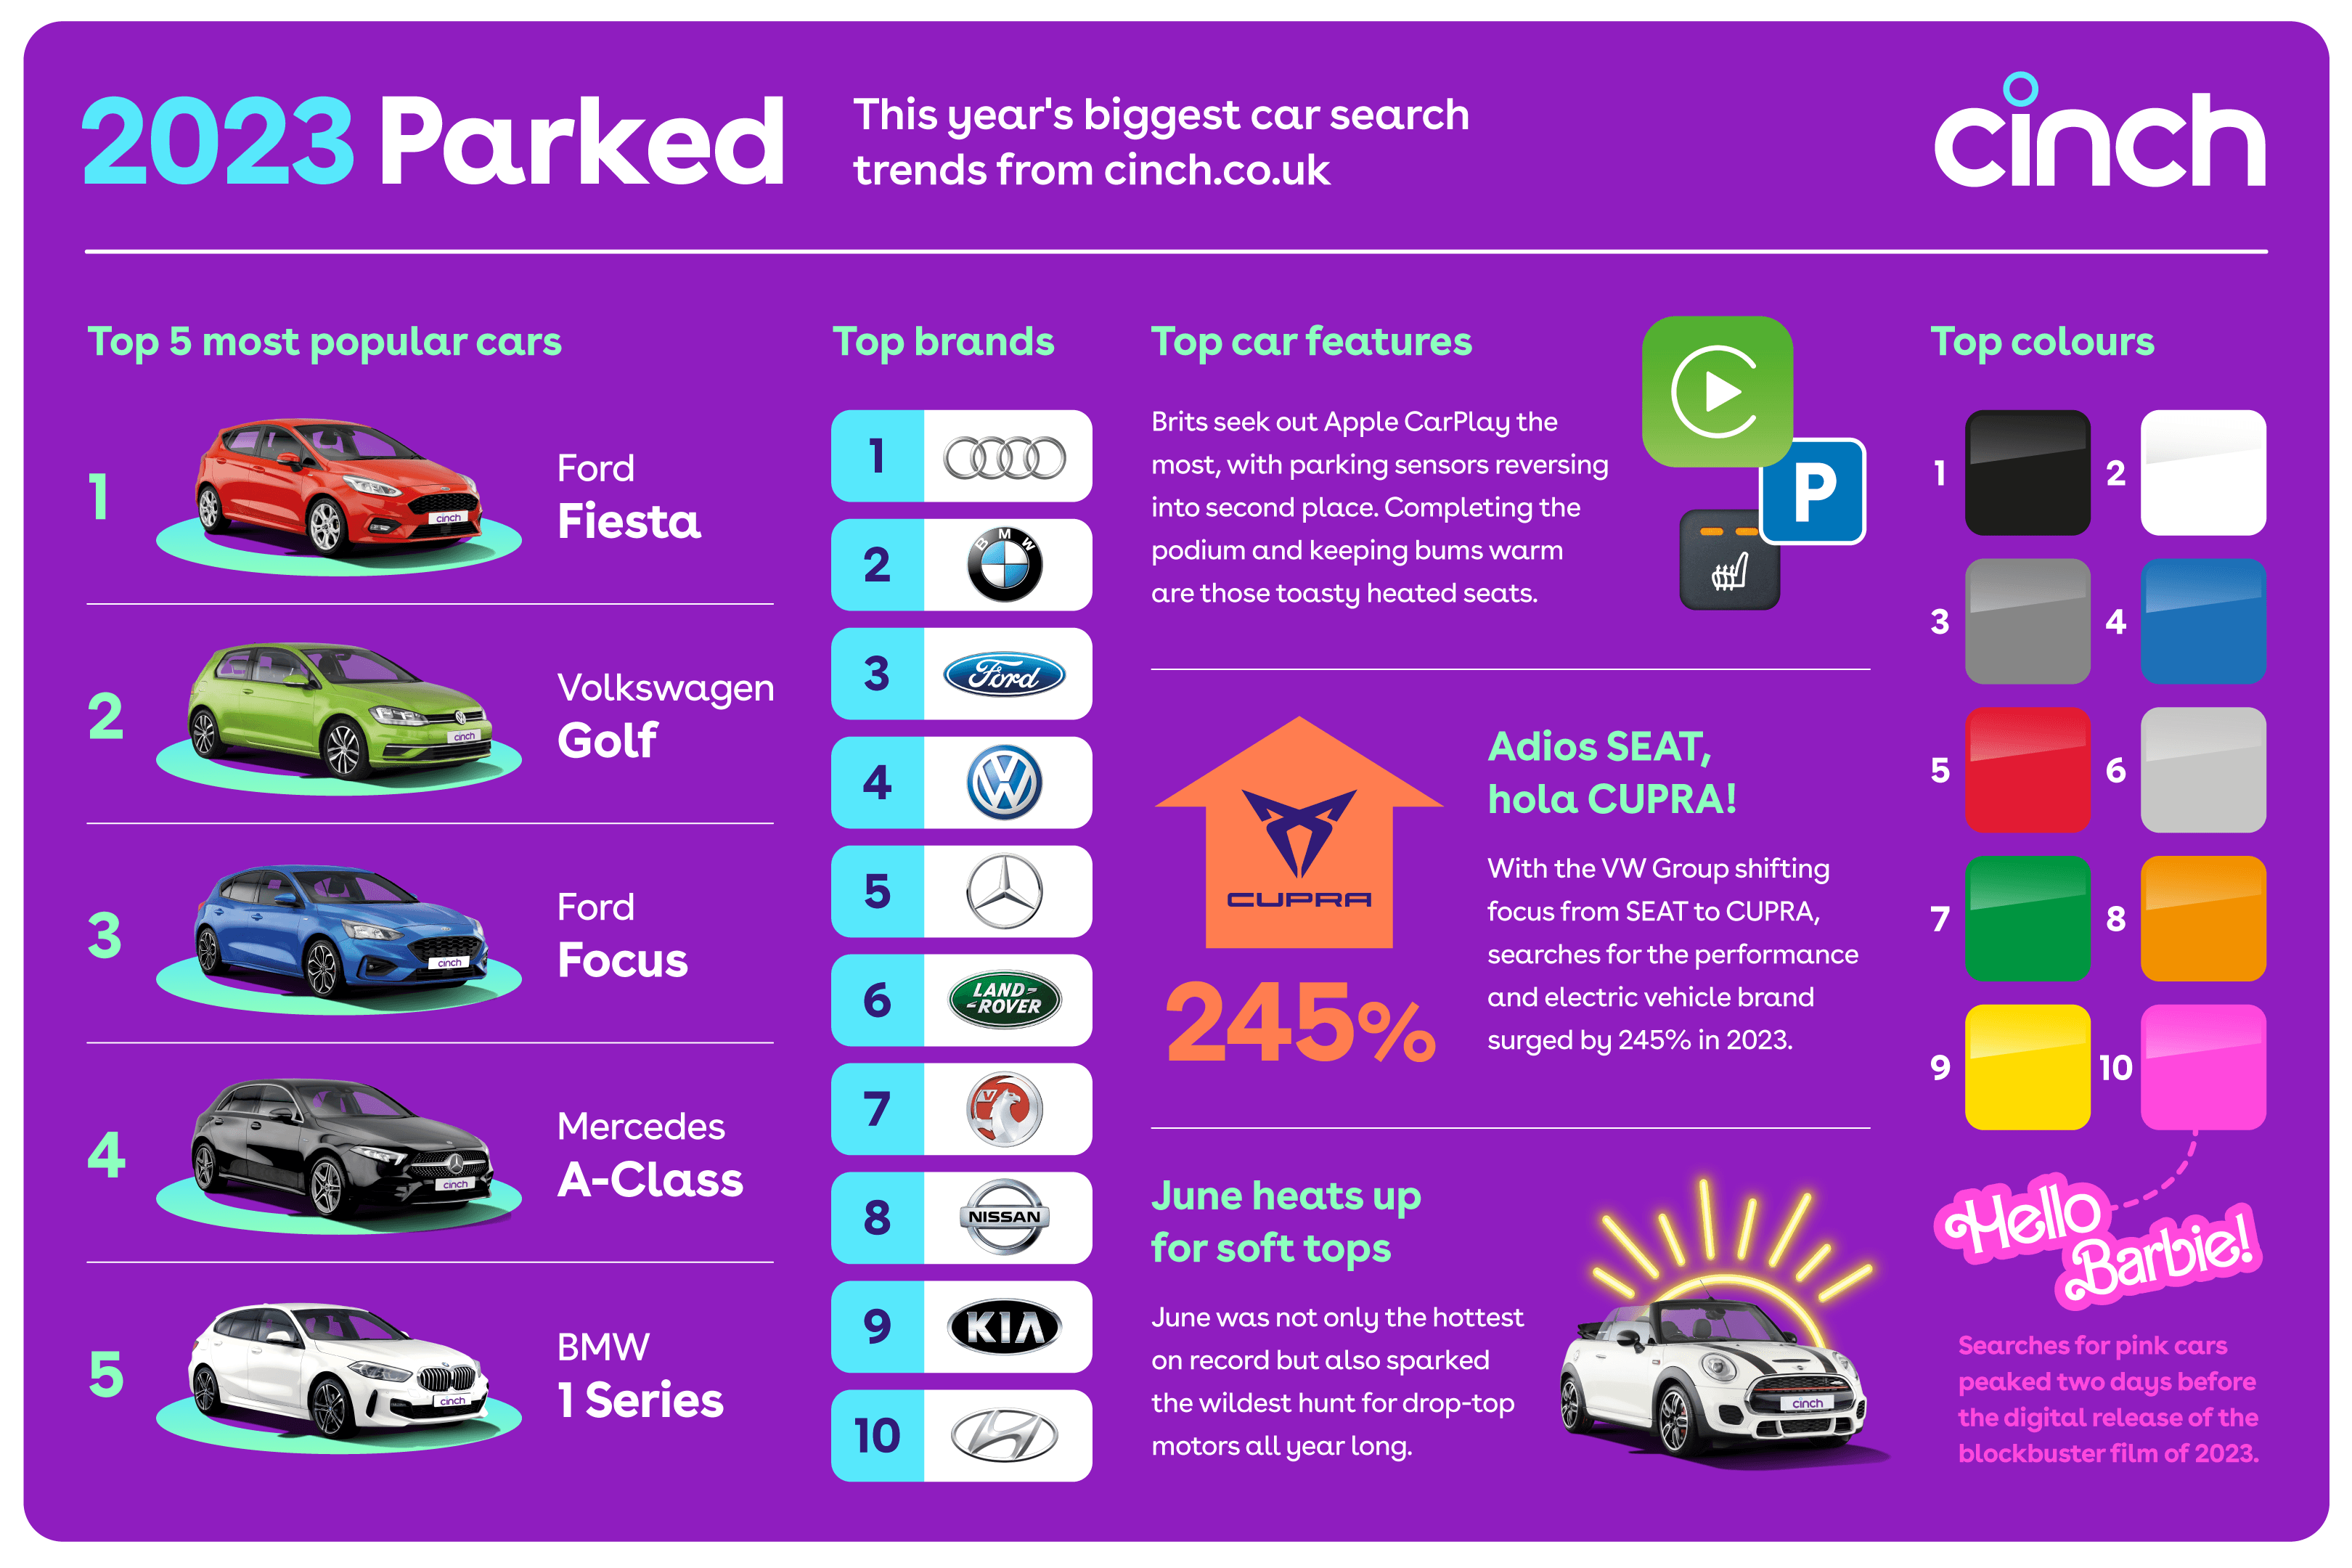 An infographic showing the details of the cinch 2023 Parked results